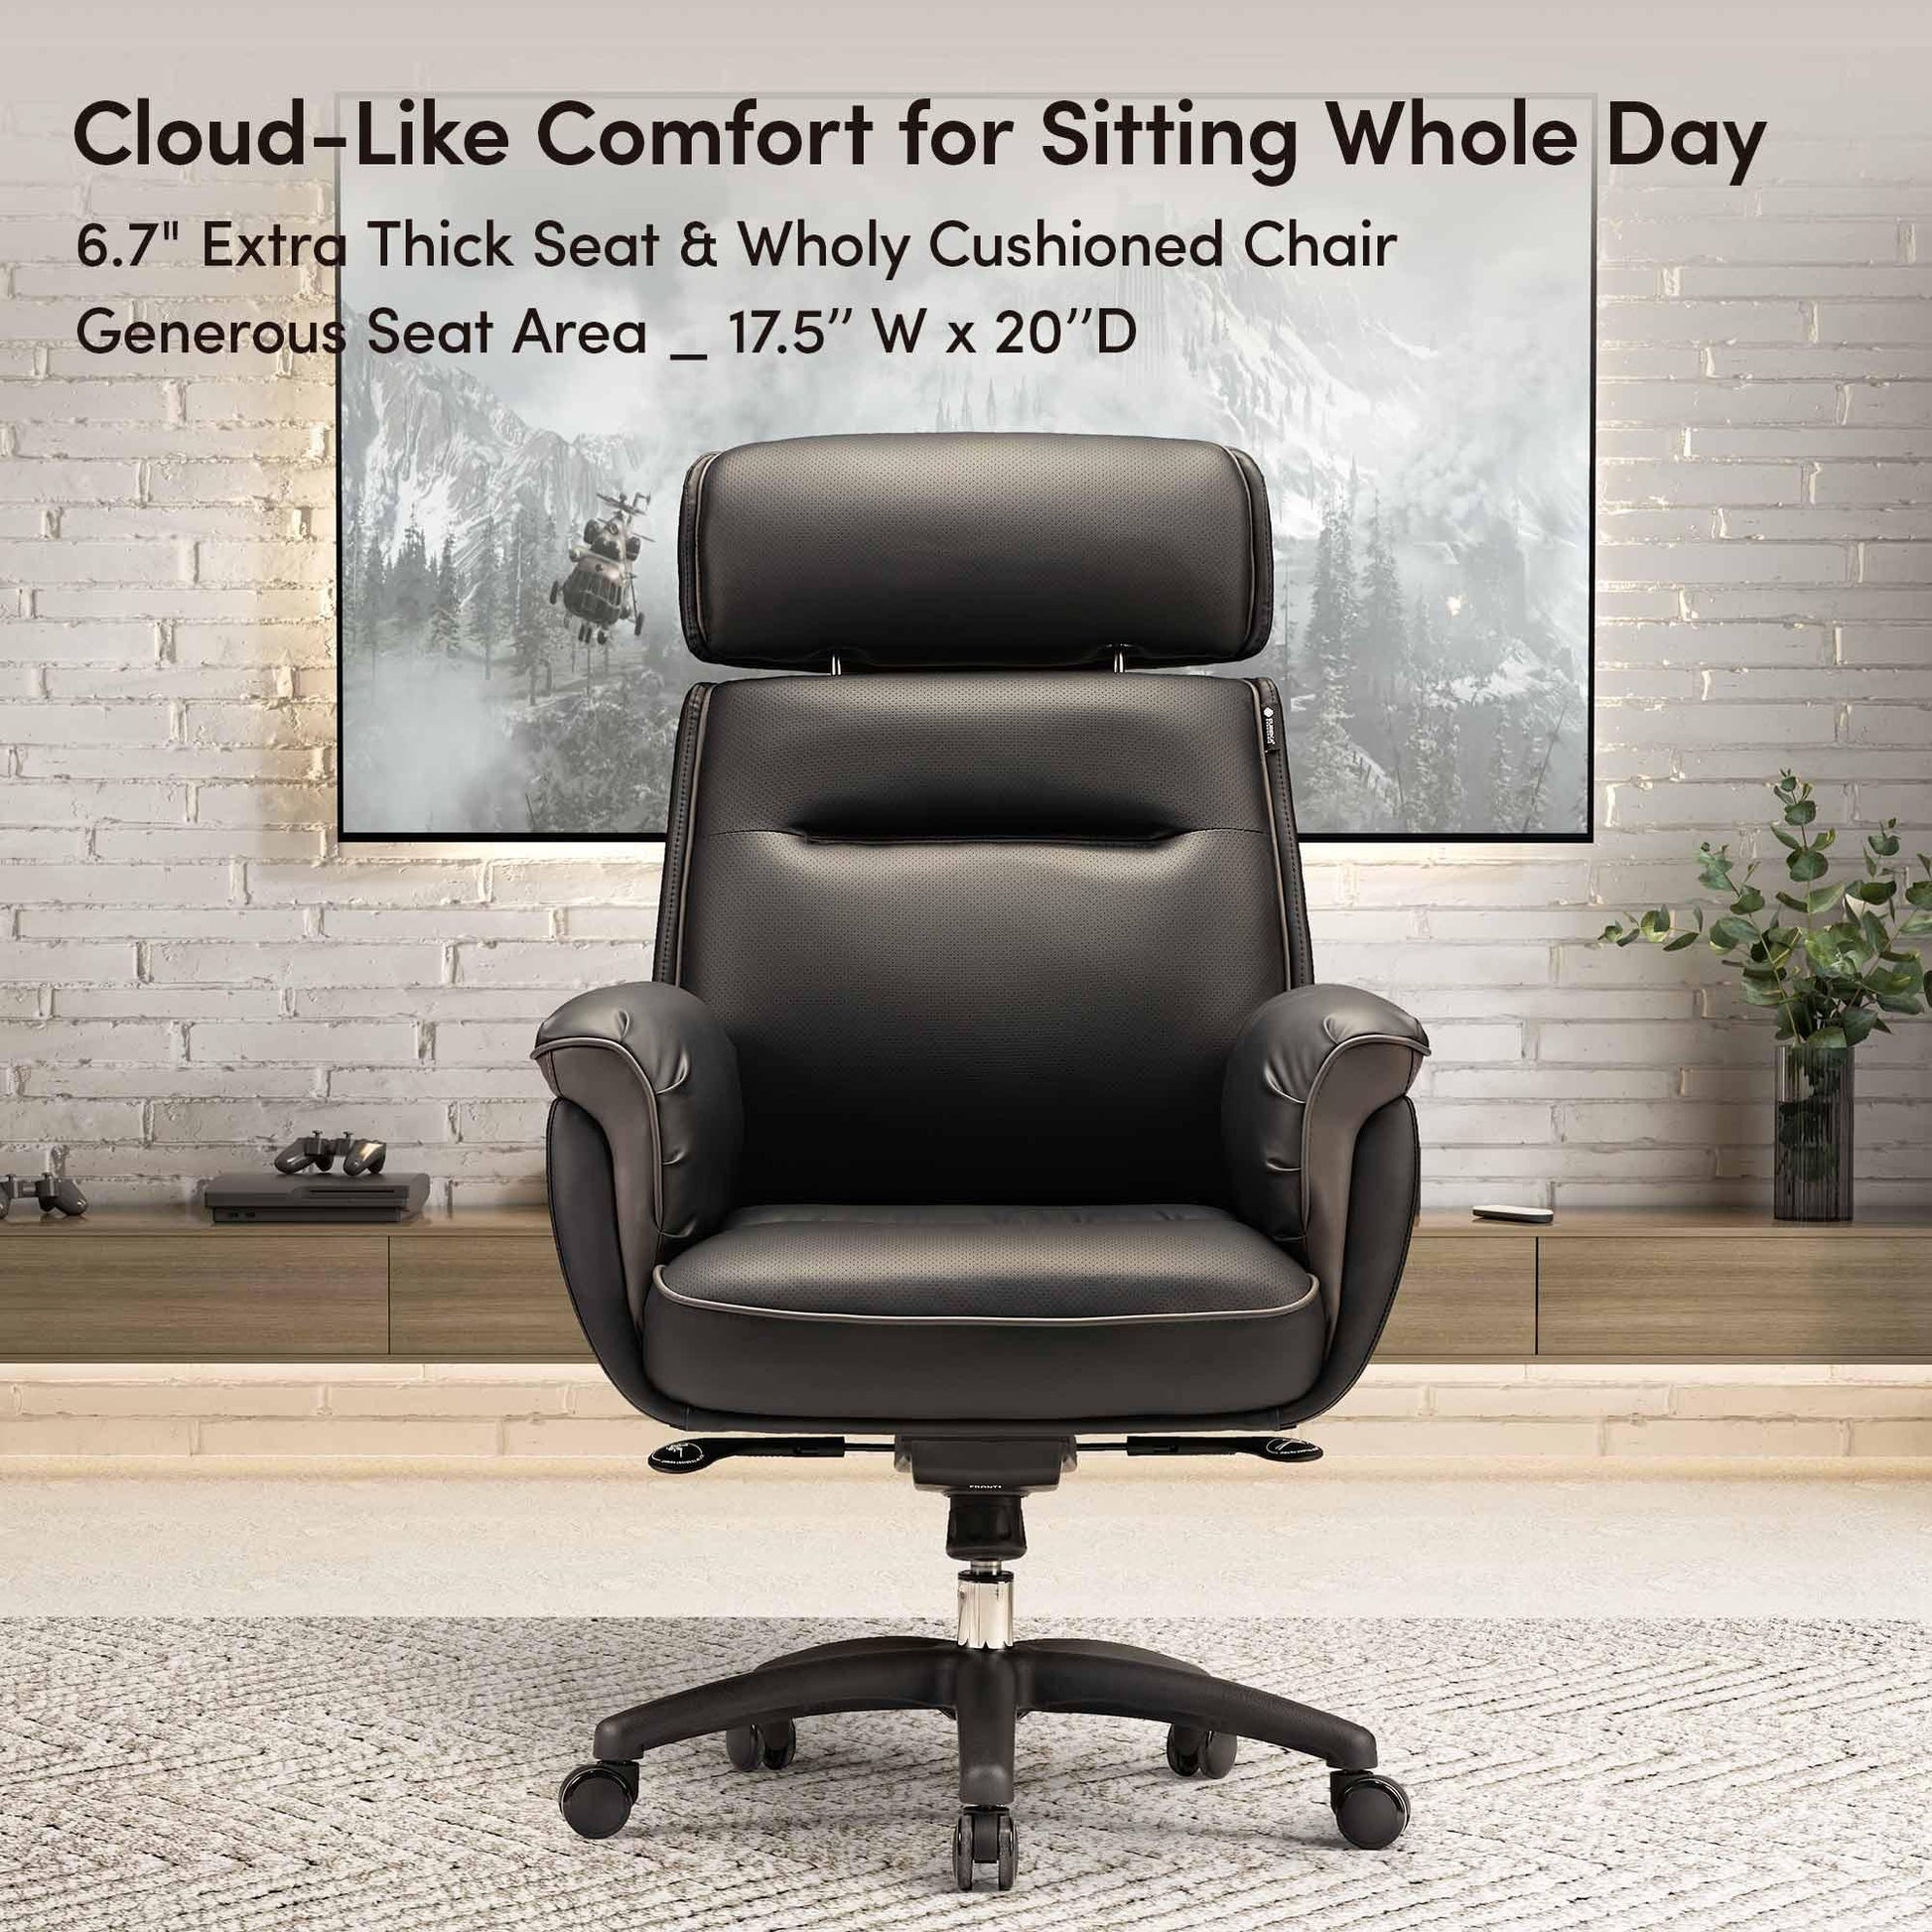 Eureka Royal, comfy leather executive office chair with high back and lumbar support, Black, Executive Office, Extra Thick 6.7 inch Cushioned Leather Padded Structure